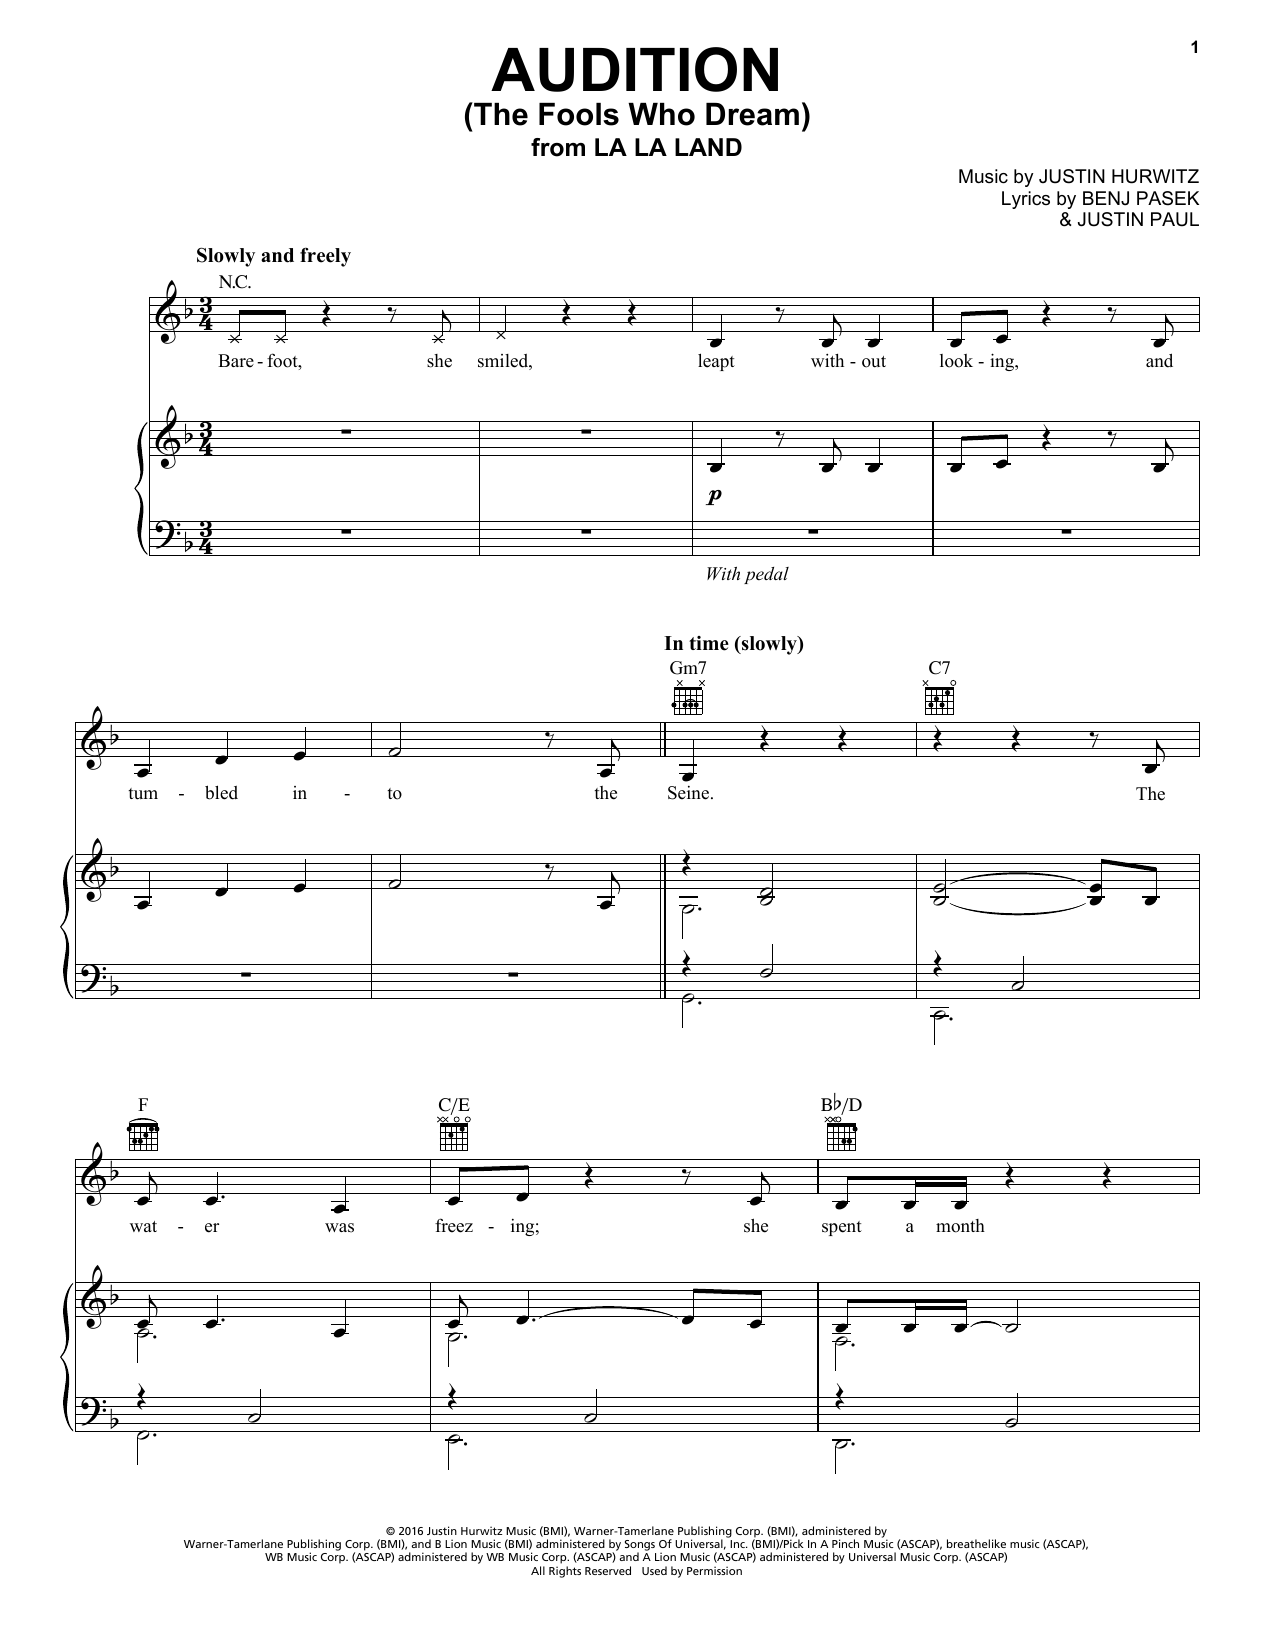 Emma Stone Audition (The Fools Who Dream) (from La La Land) sheet music notes and chords. Download Printable PDF.